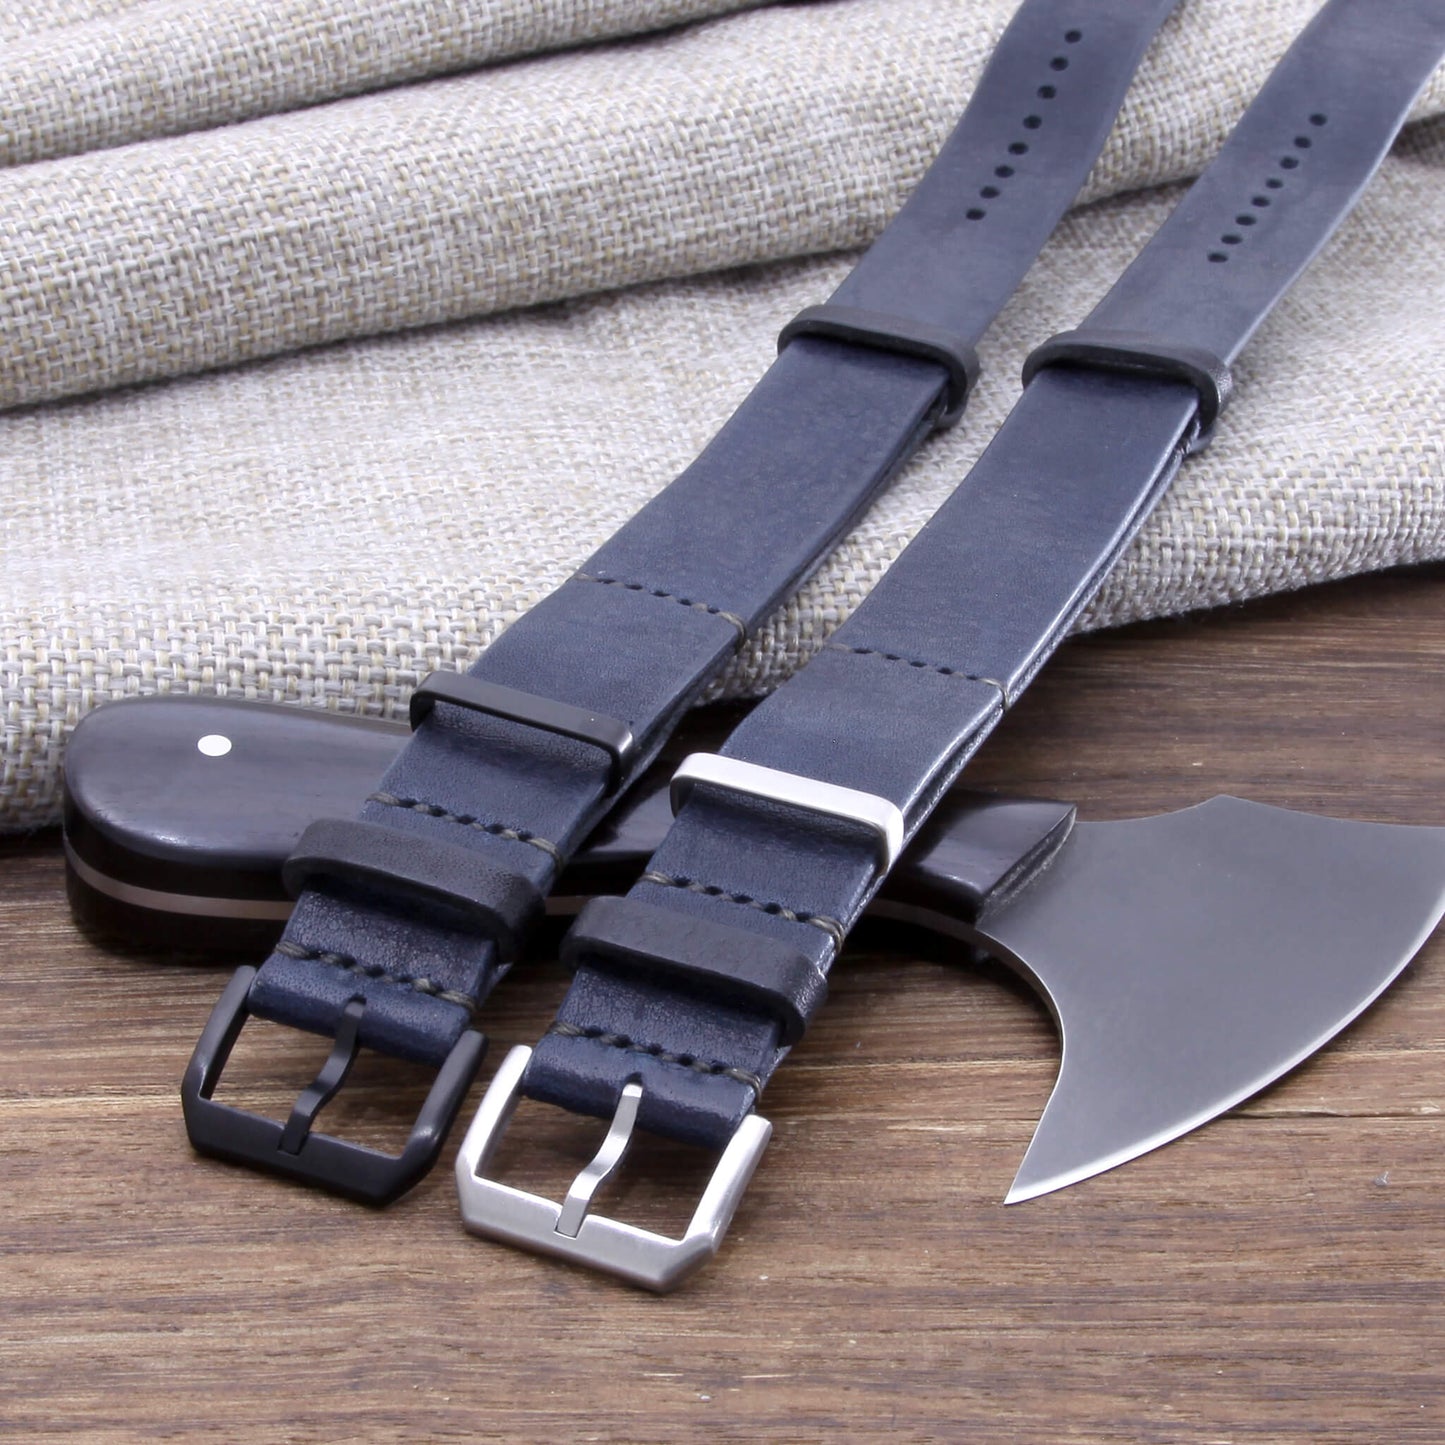 NAT2 Stylish Leather Watch Strap, Vintage 407 navy blue available in brush steel and black PVD buckle, made with full grain Italian veg-tanned leather by Cozy Handmade